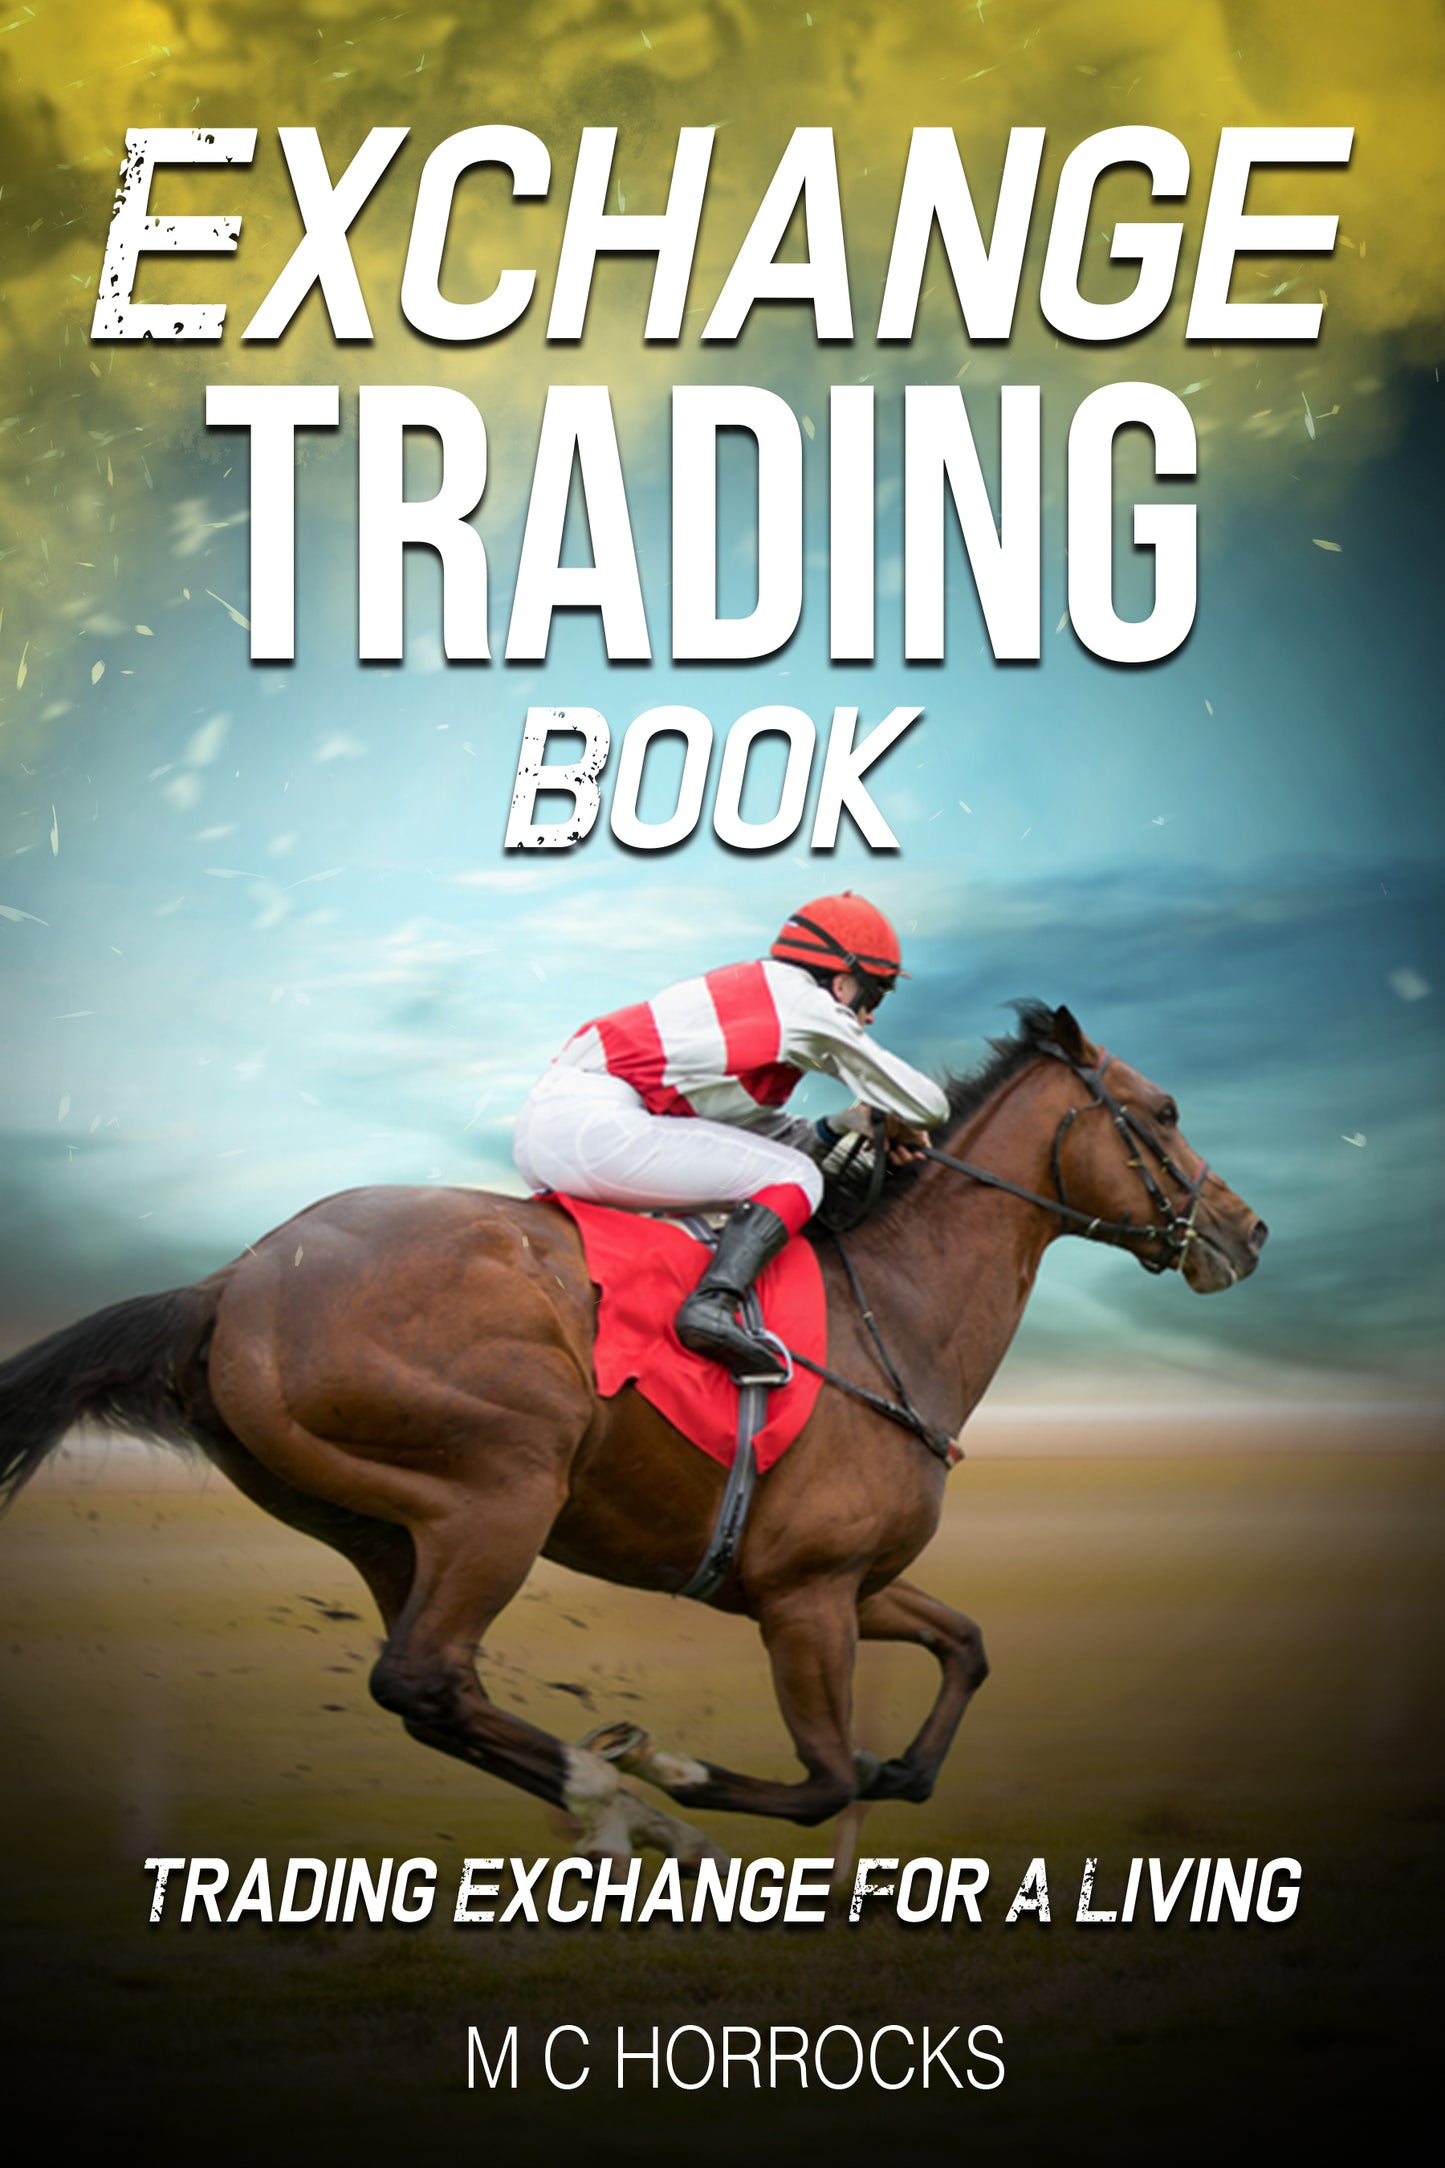 Exchange Horse Trading Paperback Book - Passive Income From Home